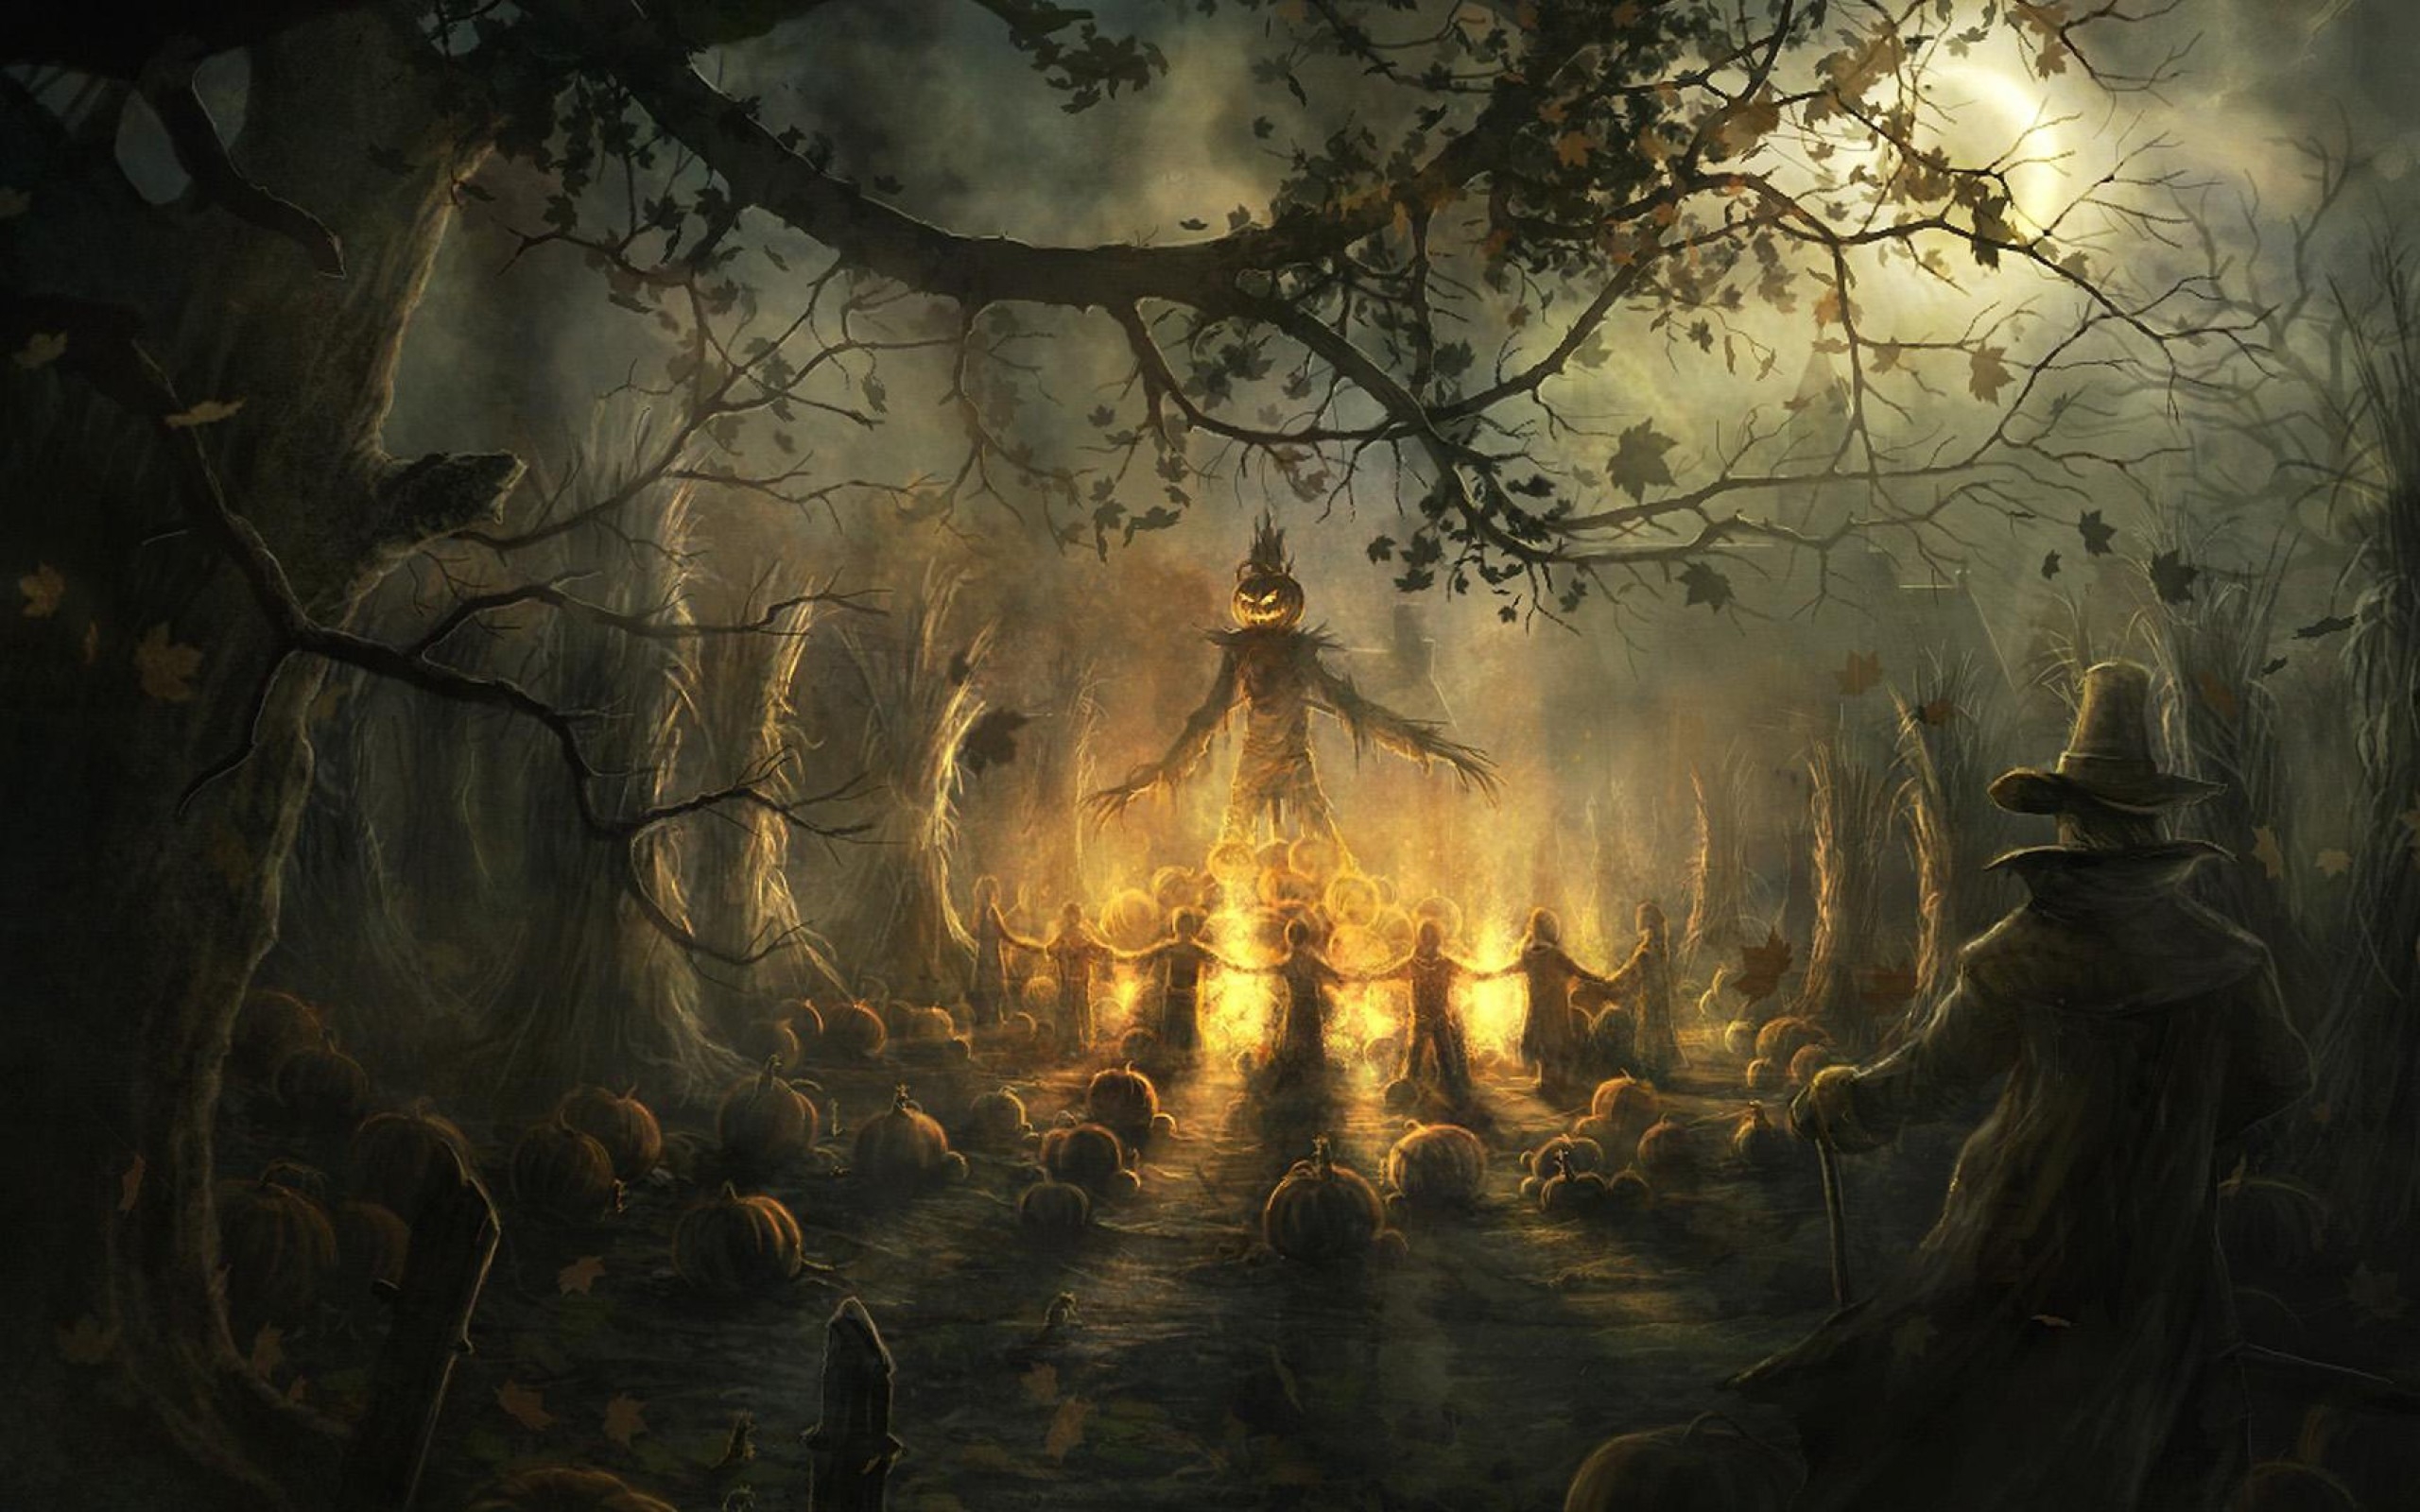 scary wallpapers,cg artwork,darkness,mythology,art,forest